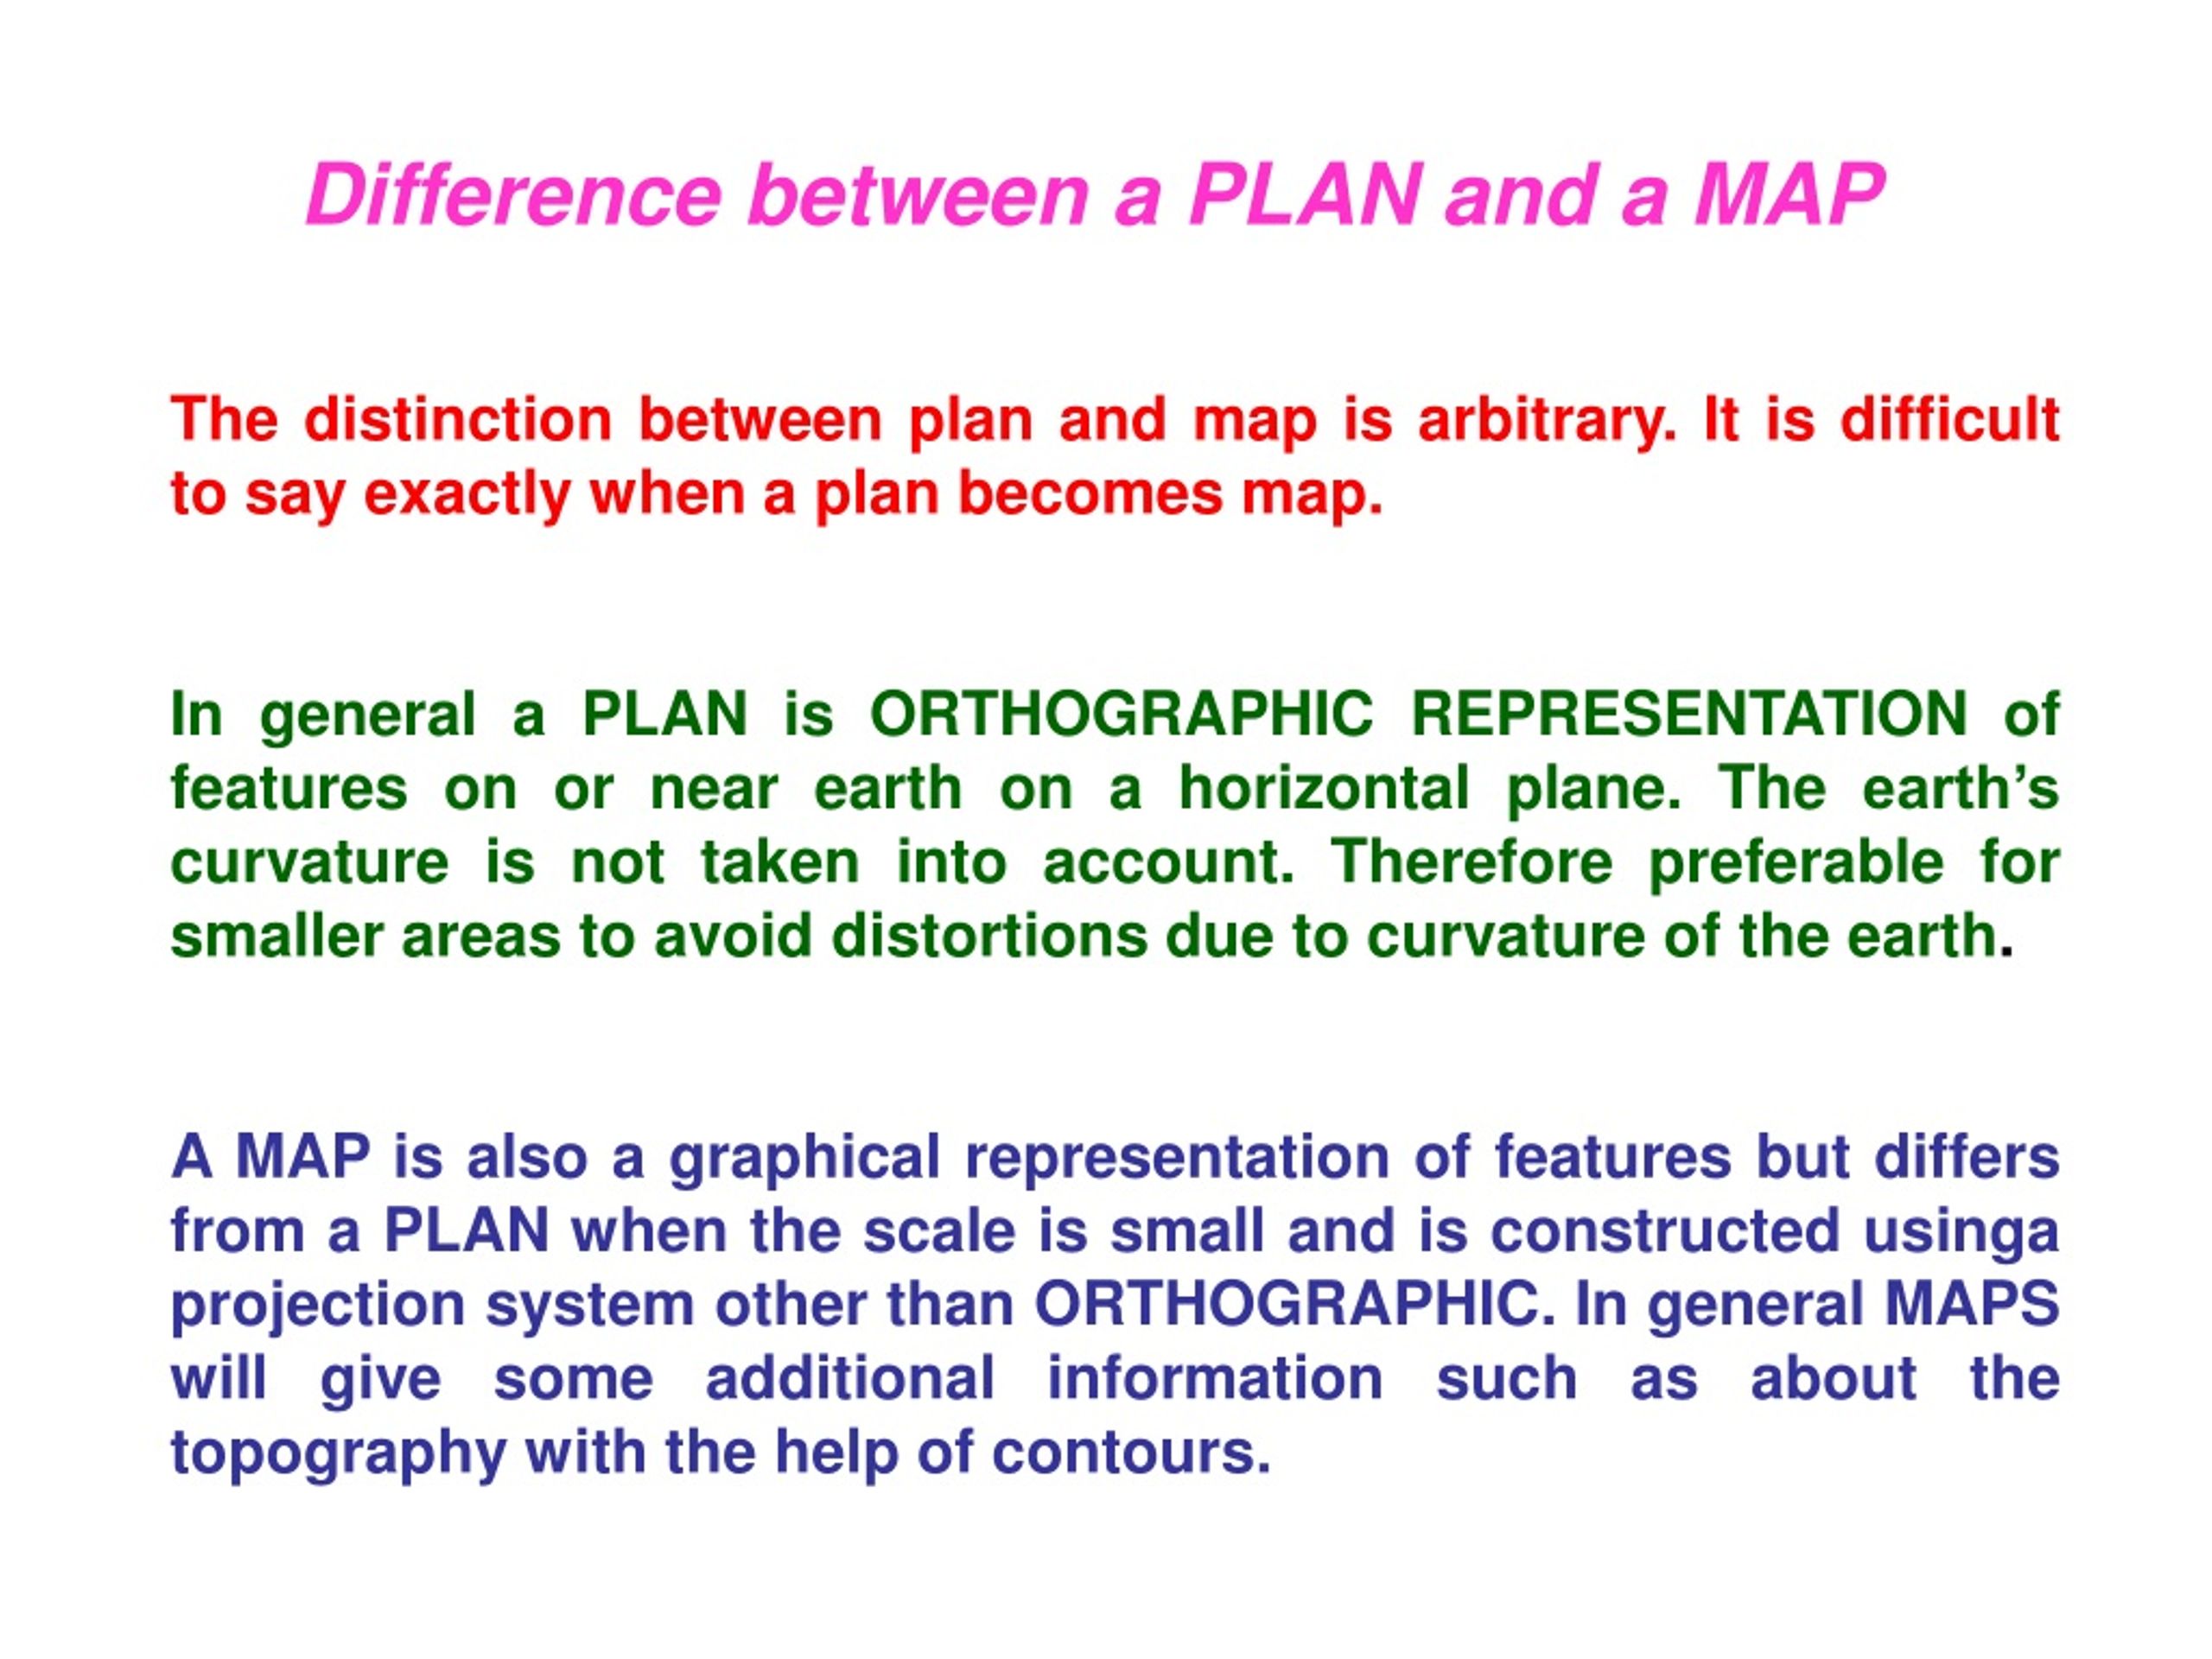 Difference Between Map And Apply 